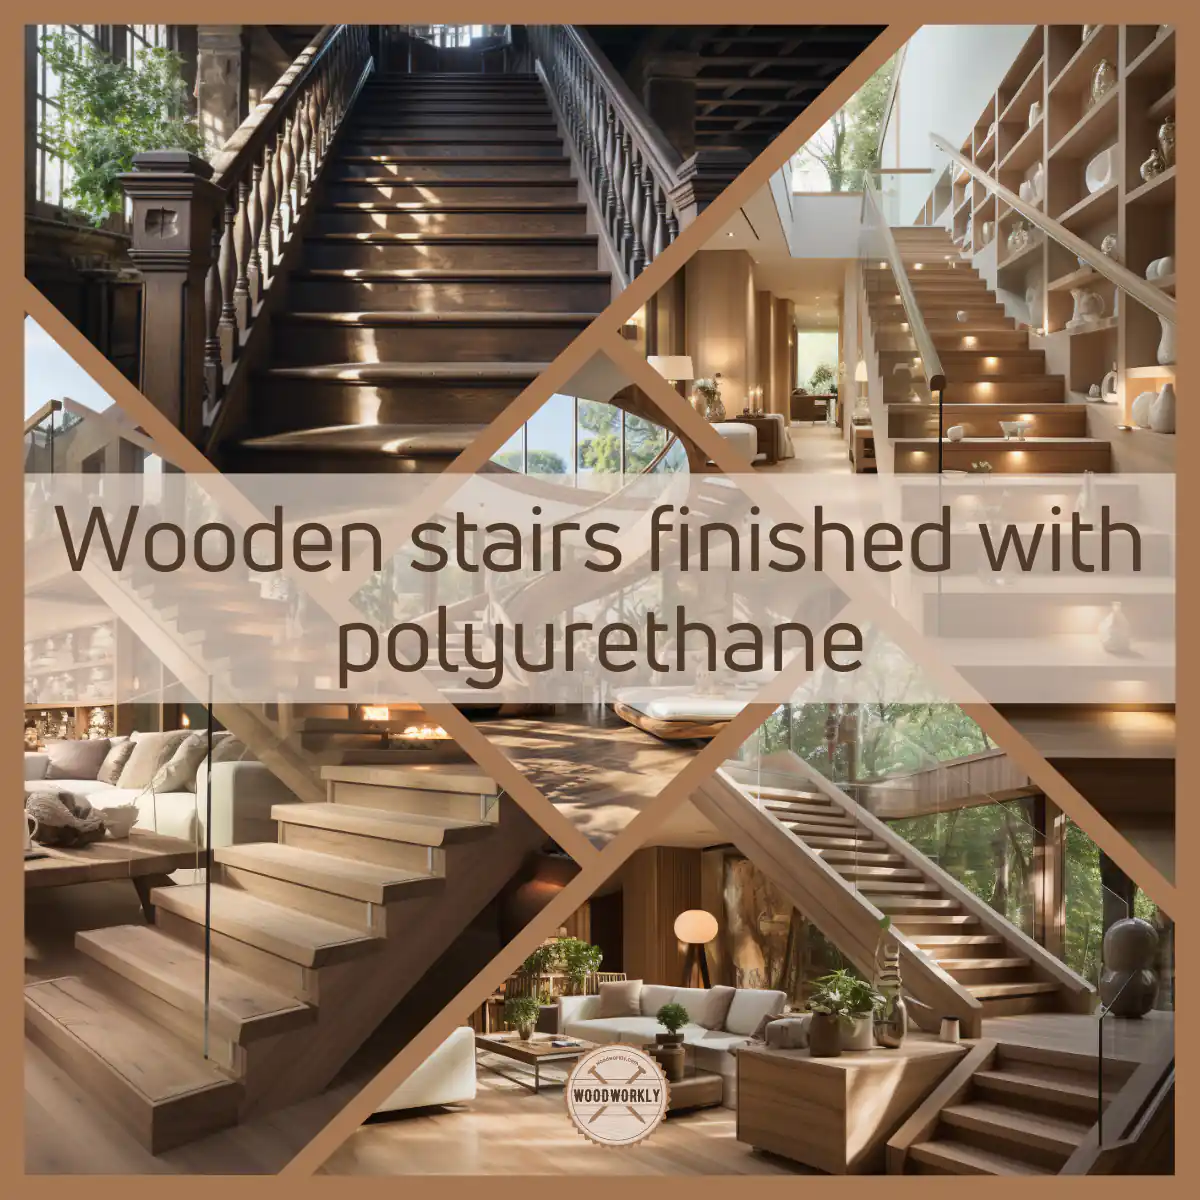 Wooden stairs finished with polyurethane